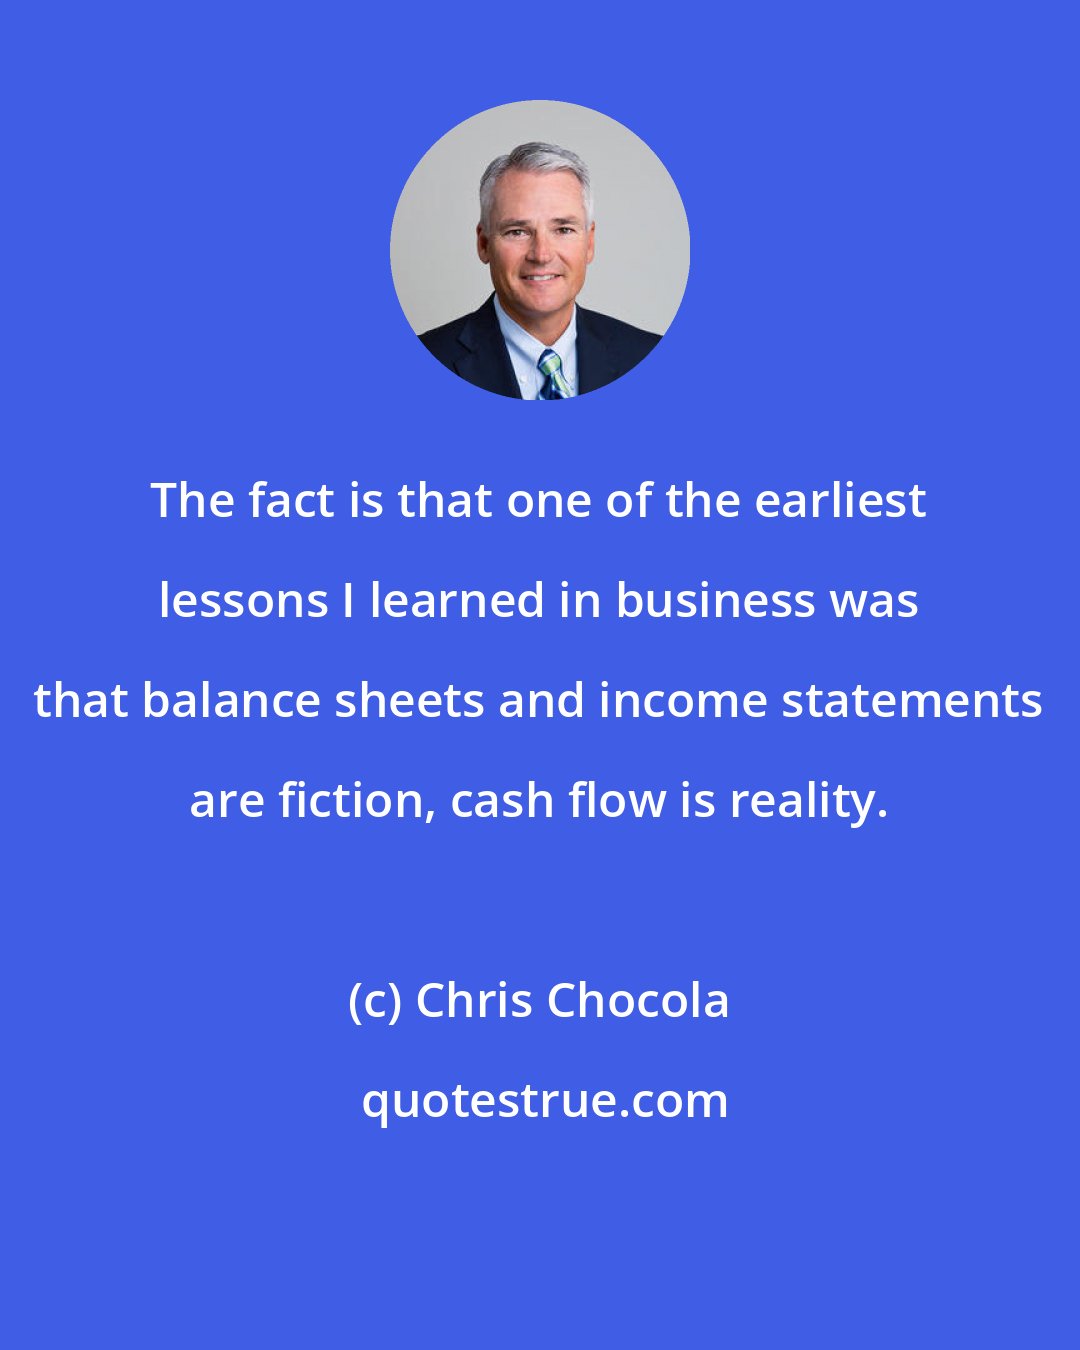 Chris Chocola: The fact is that one of the earliest lessons I learned in business was that balance sheets and income statements are fiction, cash flow is reality.